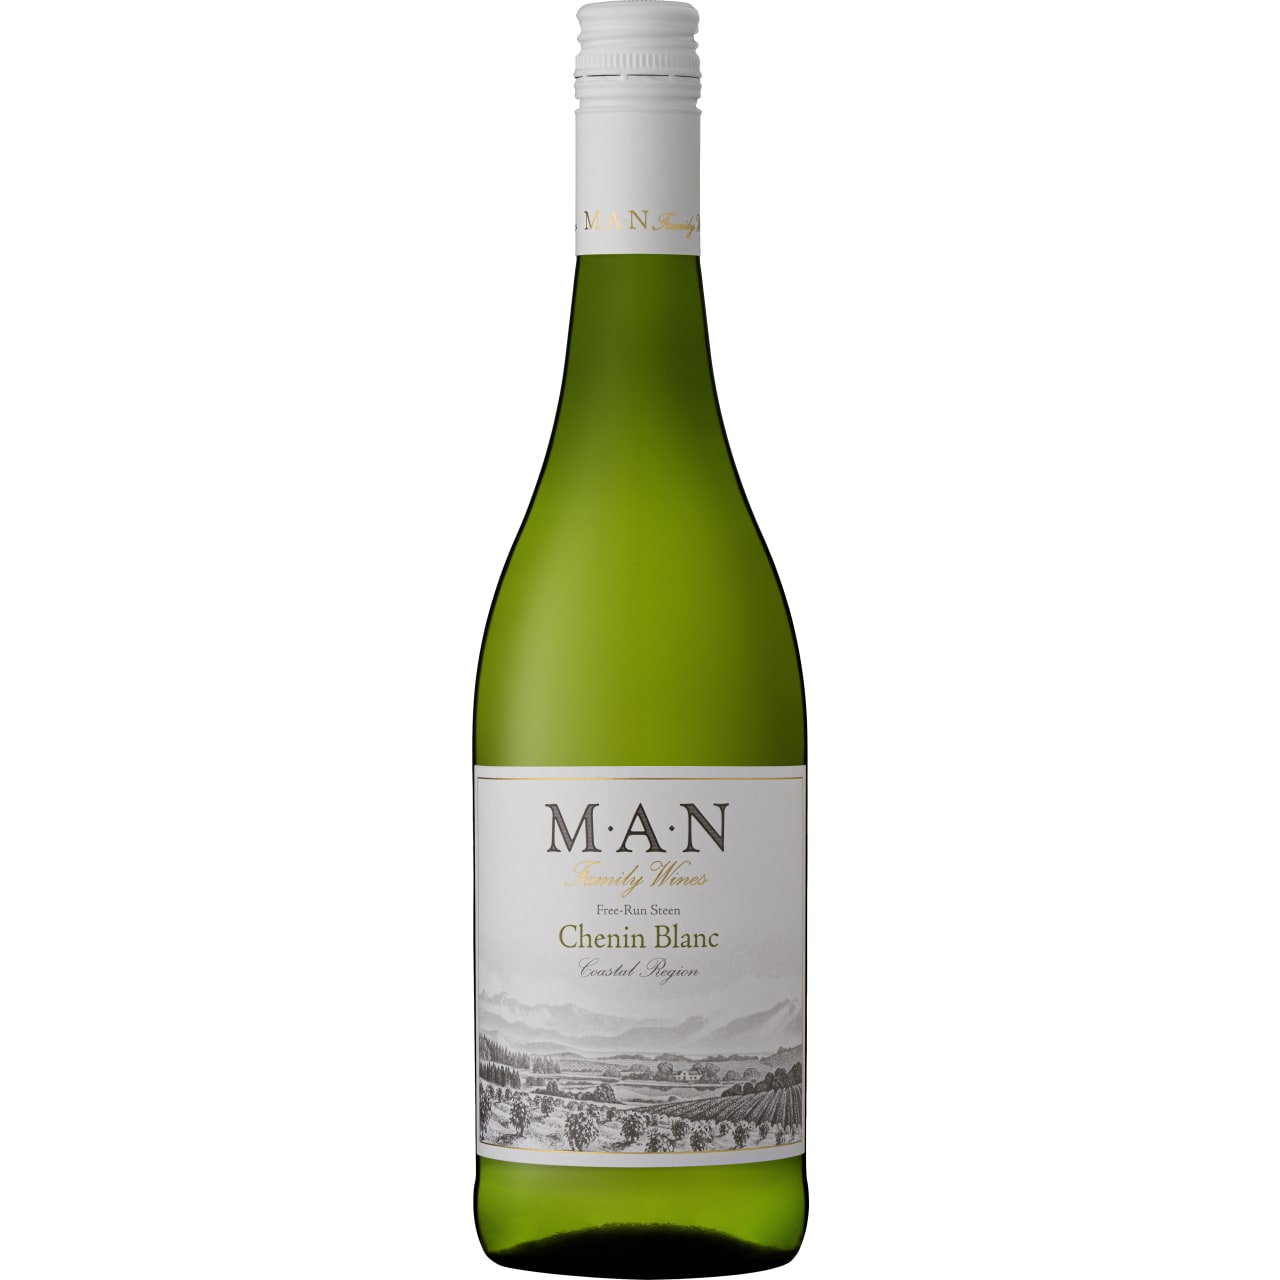 It's bursting with flavour, and is a mouth-watering Chenin Blanc with intense tropical fruit flavours offset by a vibrant acidity.